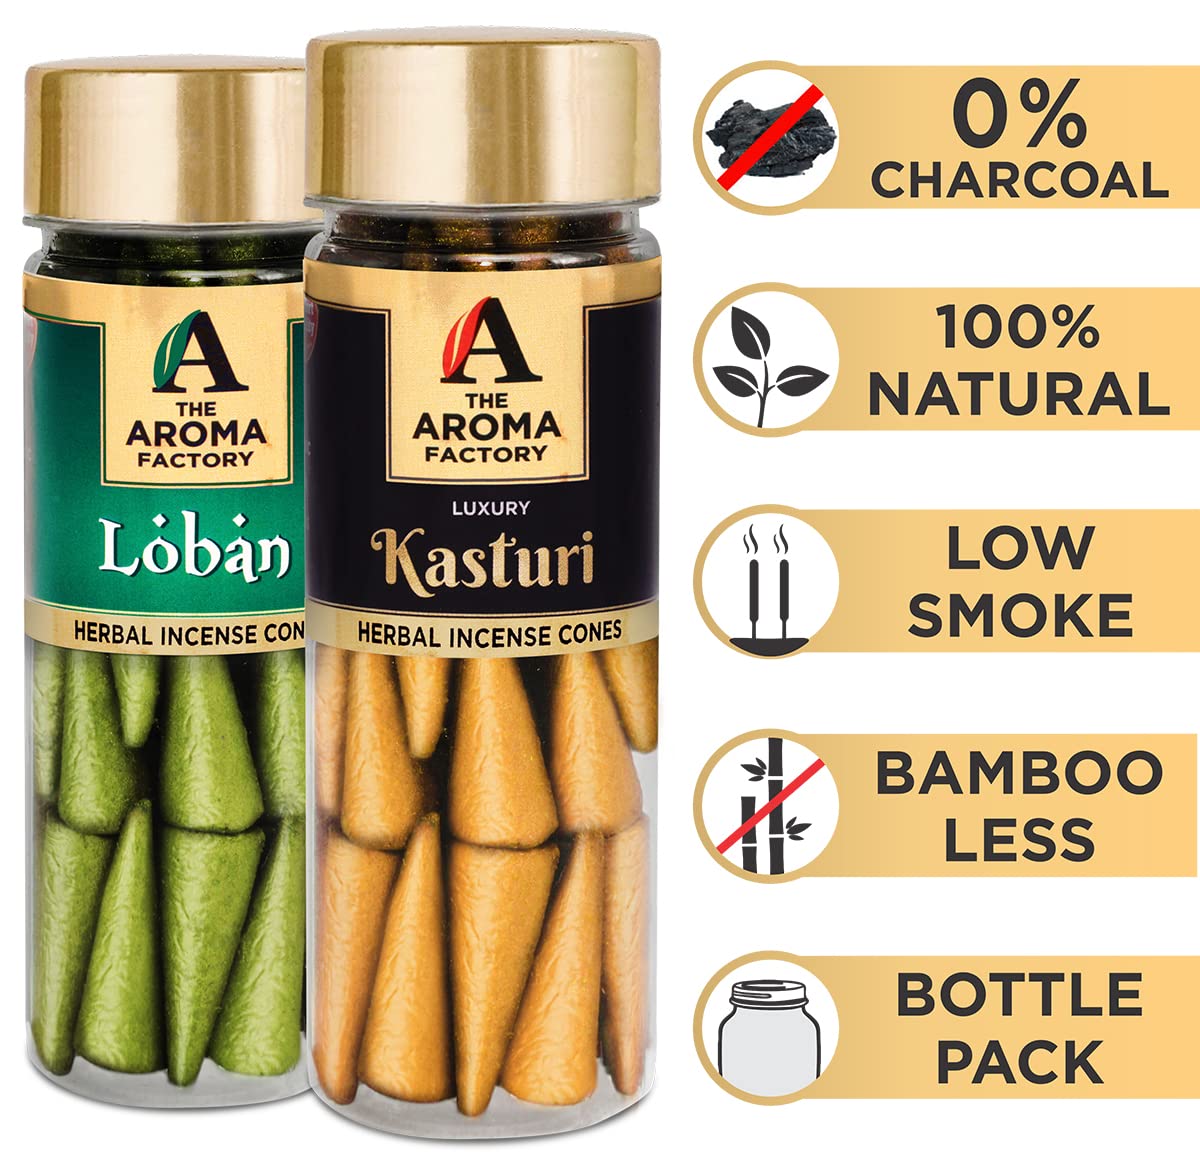 The Aroma Factory Incense Dhoop Cone for Puja, Loban & Kasturi (100% Herbal & 0% Charcoal) 2 Bottles x 30 Cones